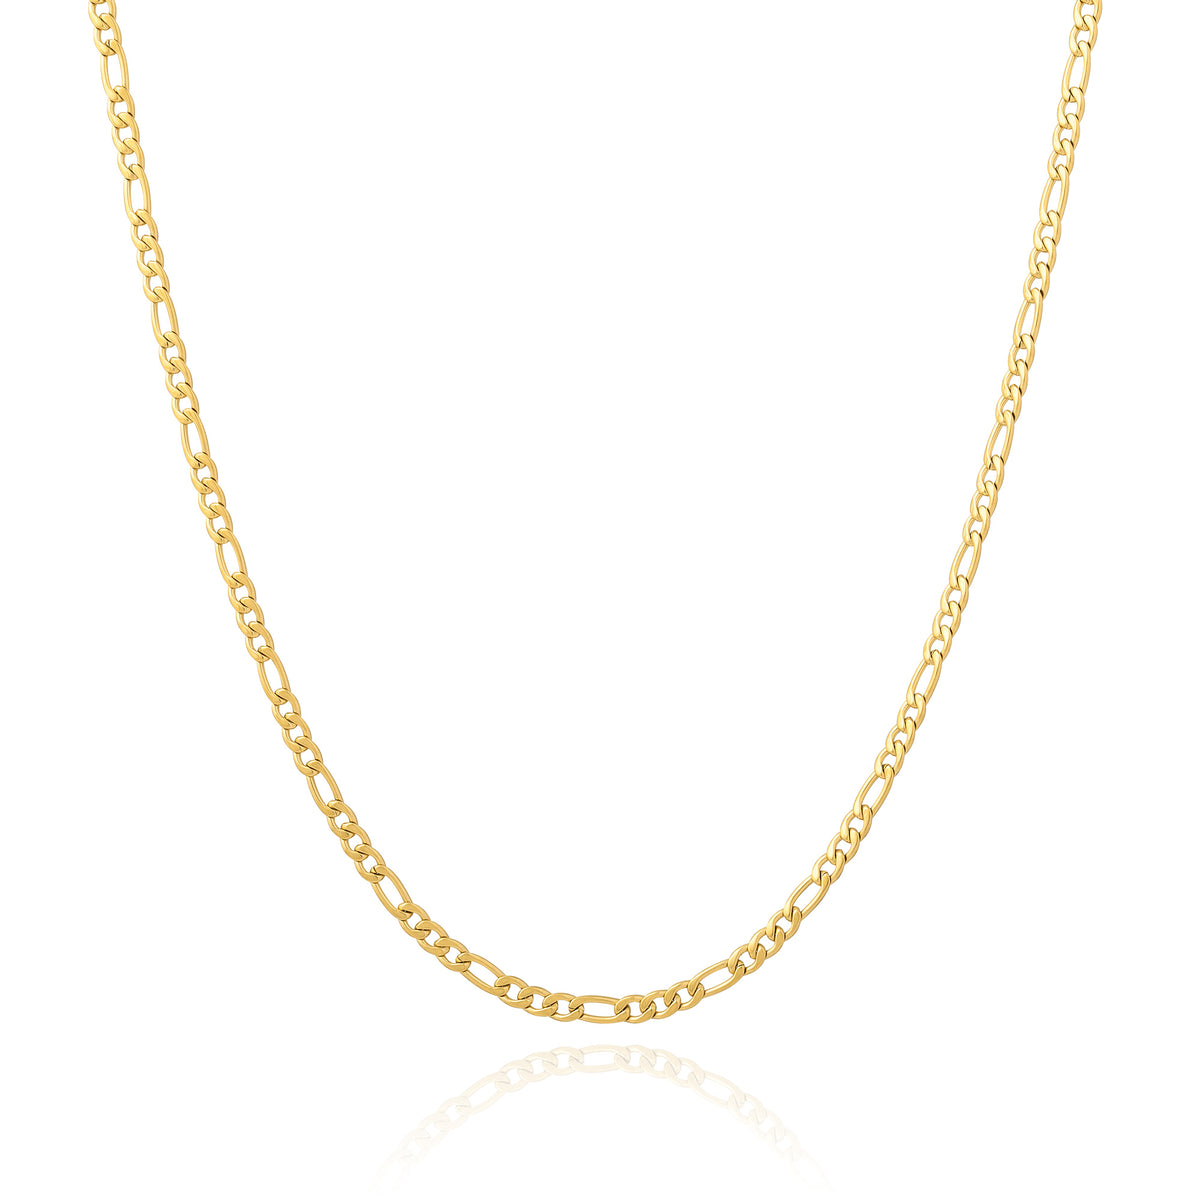 Gold figaro chain necklace on white